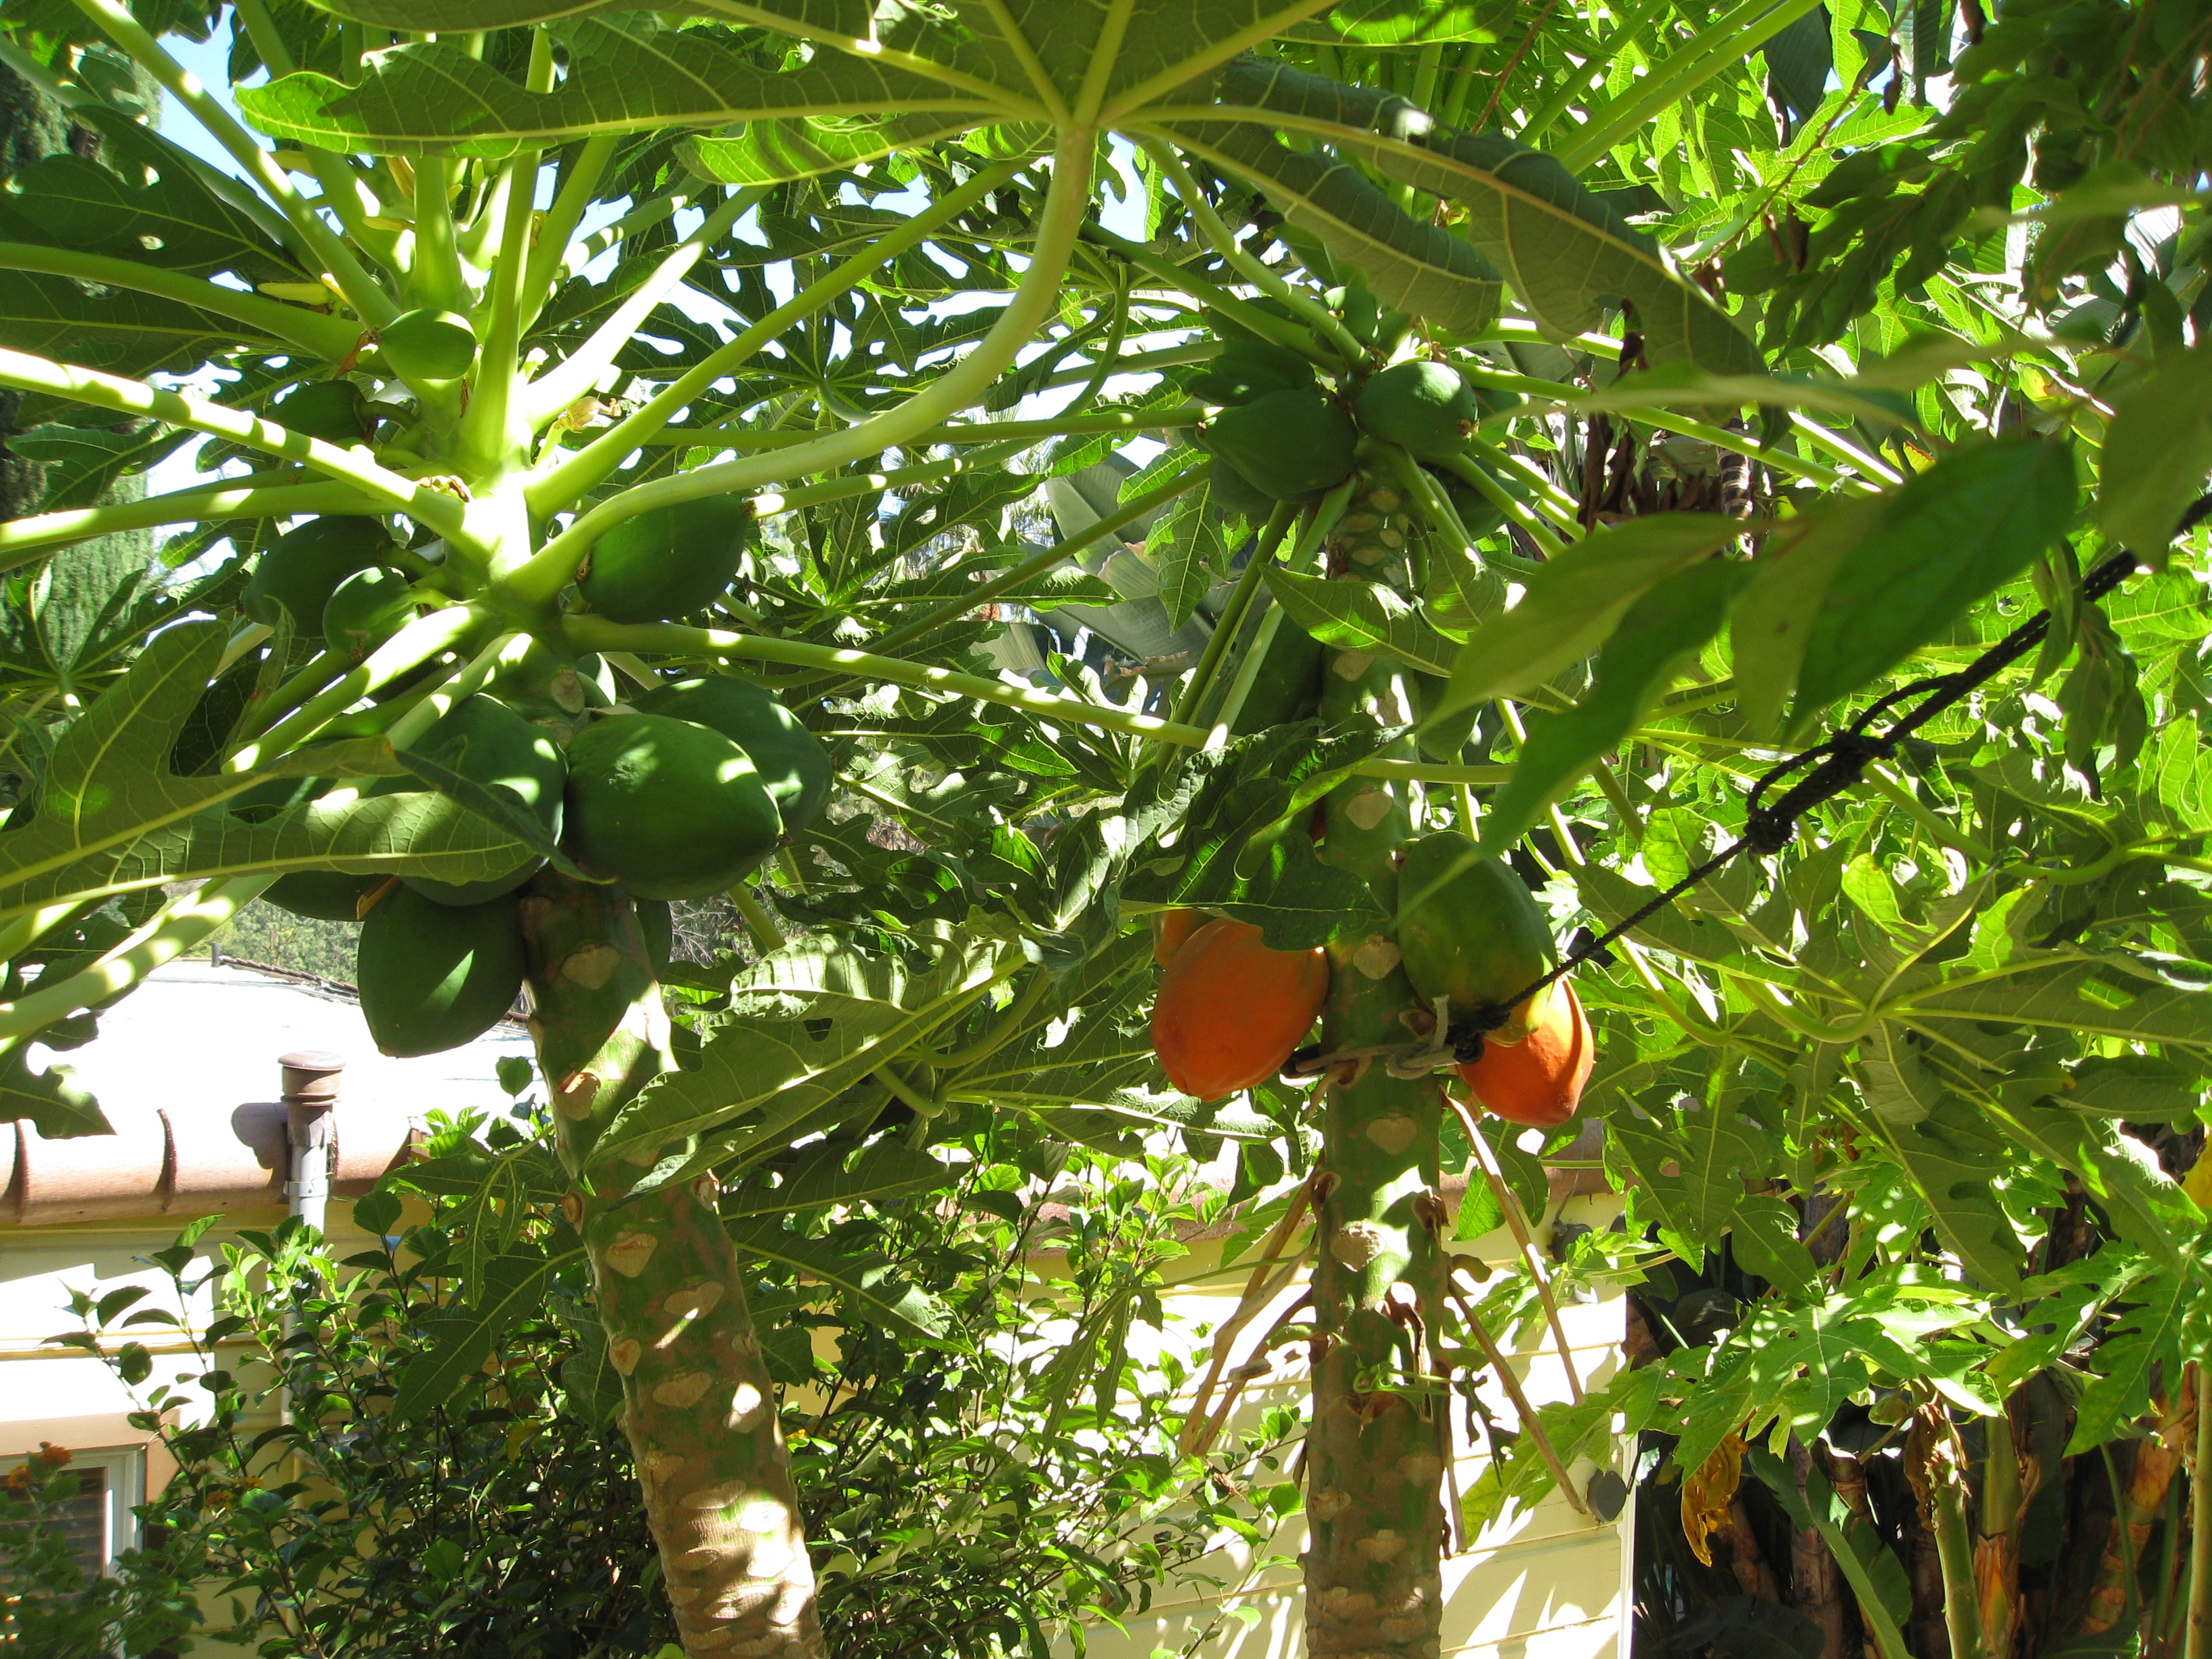 Papayas in Los Angeles? Yes!